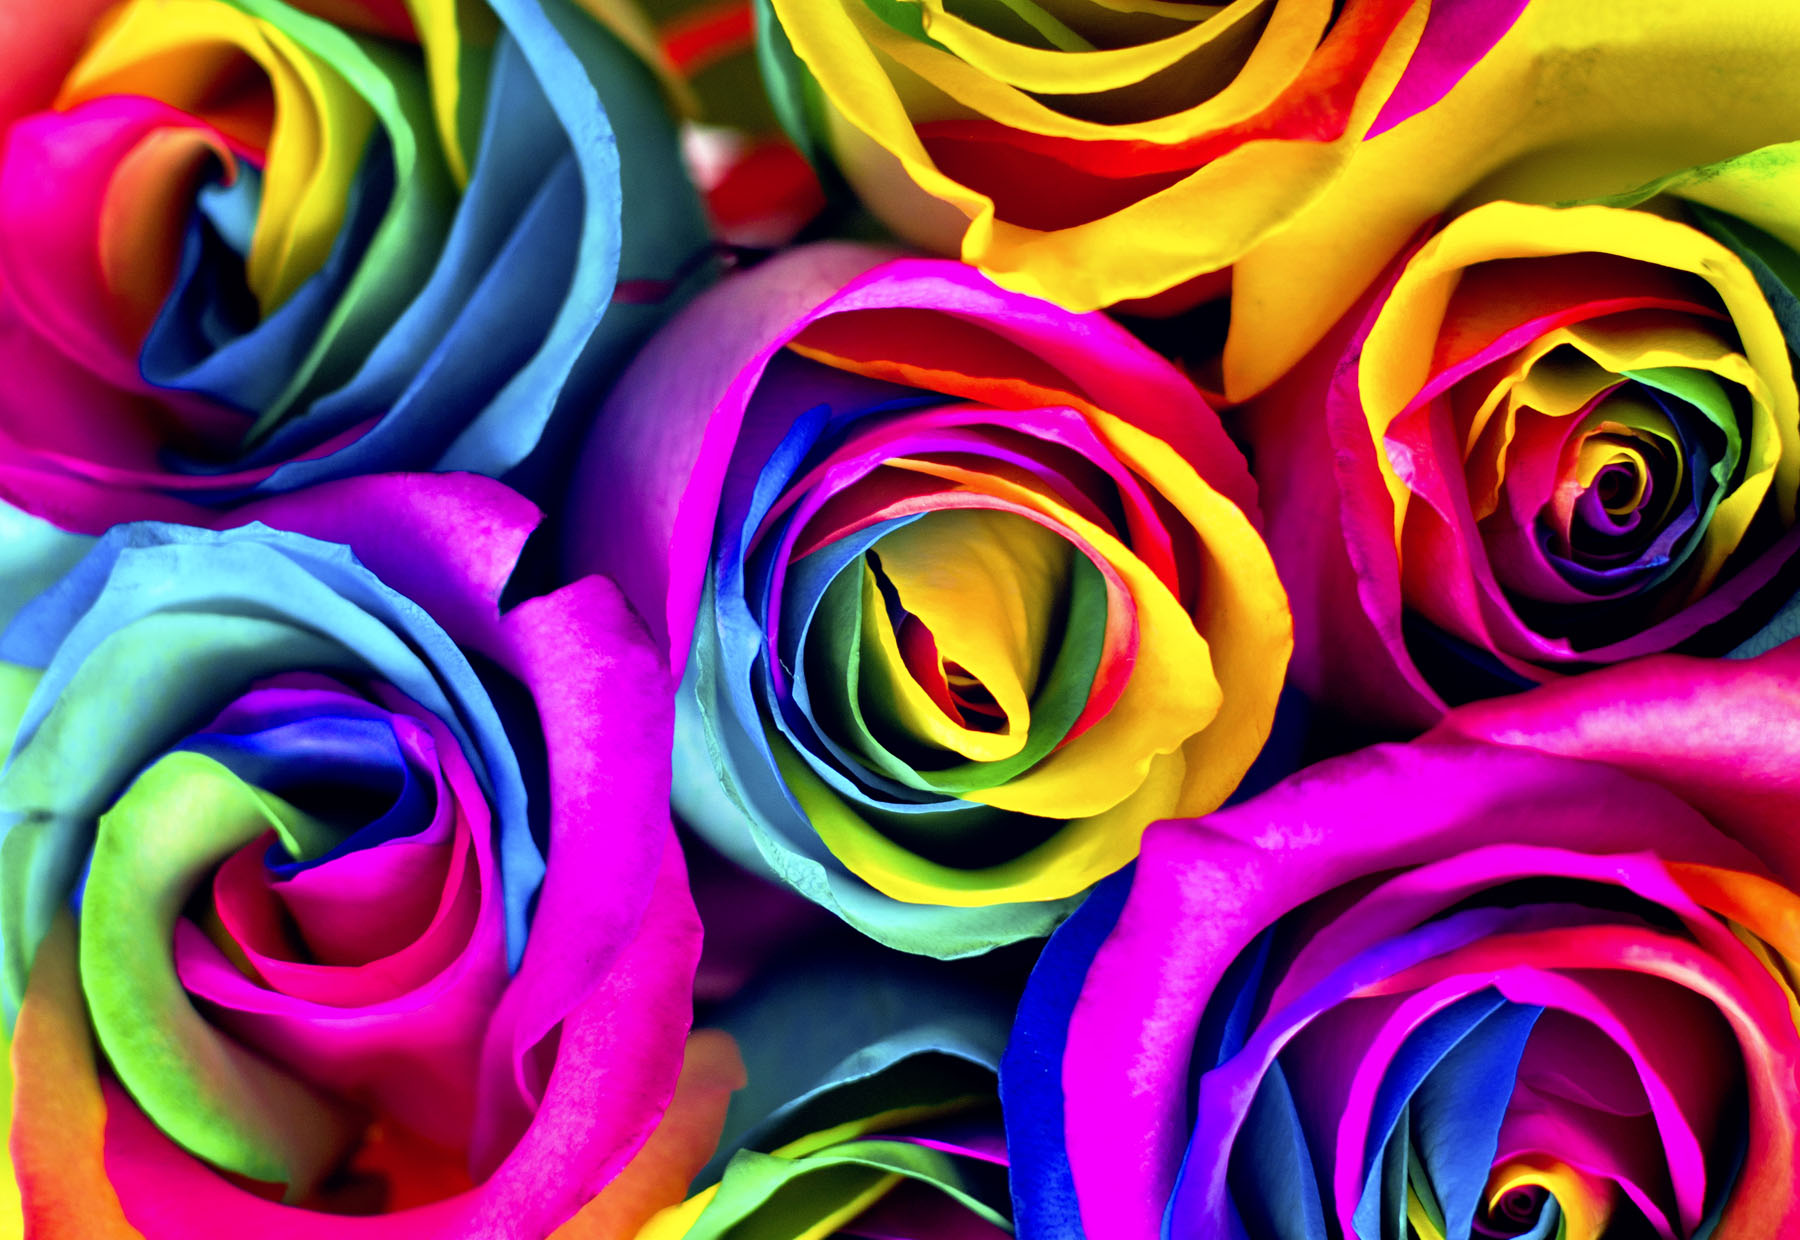 Flowers to dye for: How to make rainbow roses | Jewish Journal